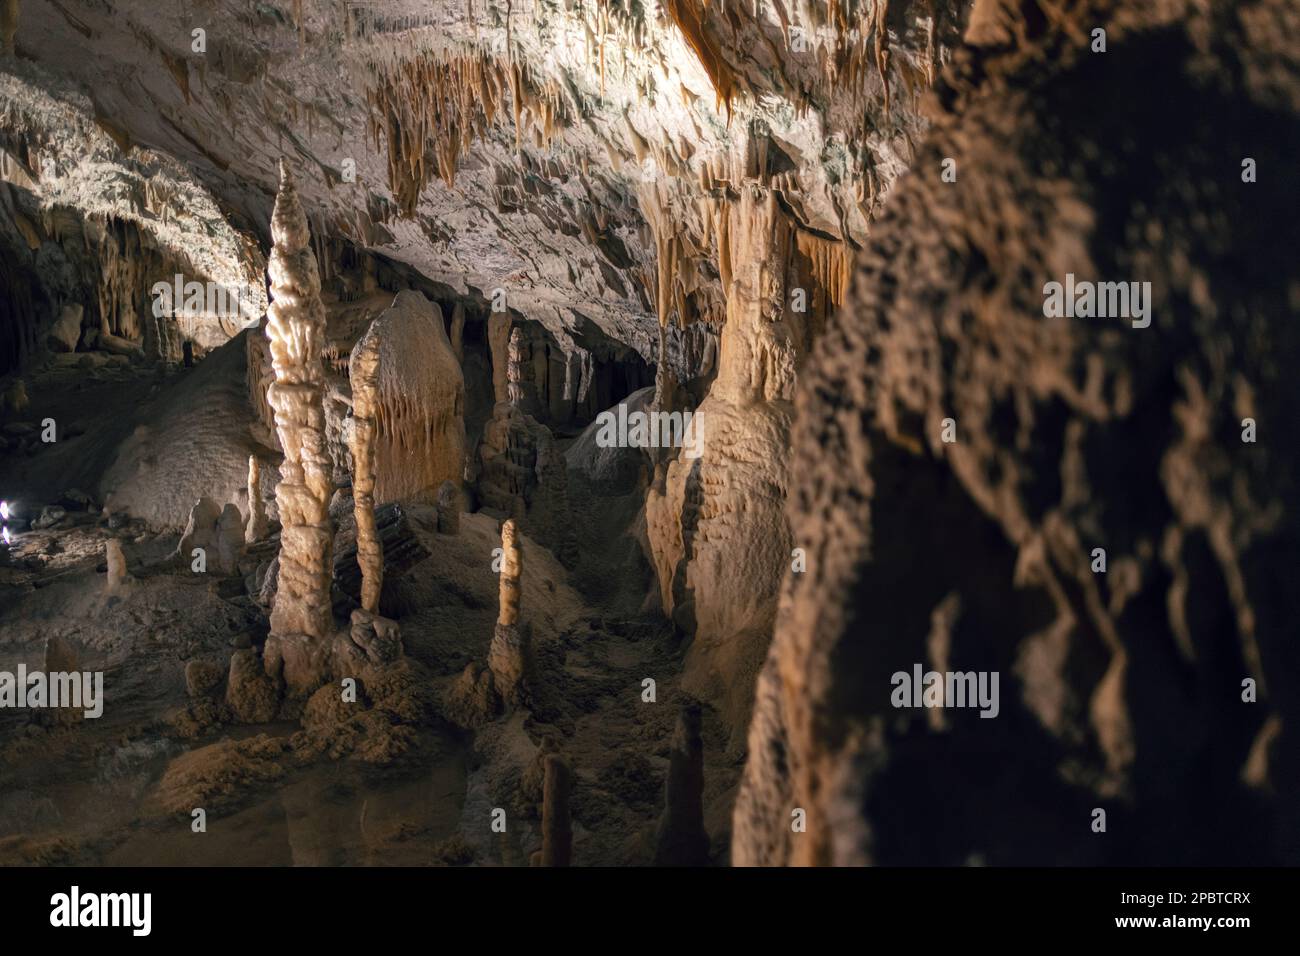 Illuminated dropstones, stalactite and stalagmite mineral formation in caves Stock Photo